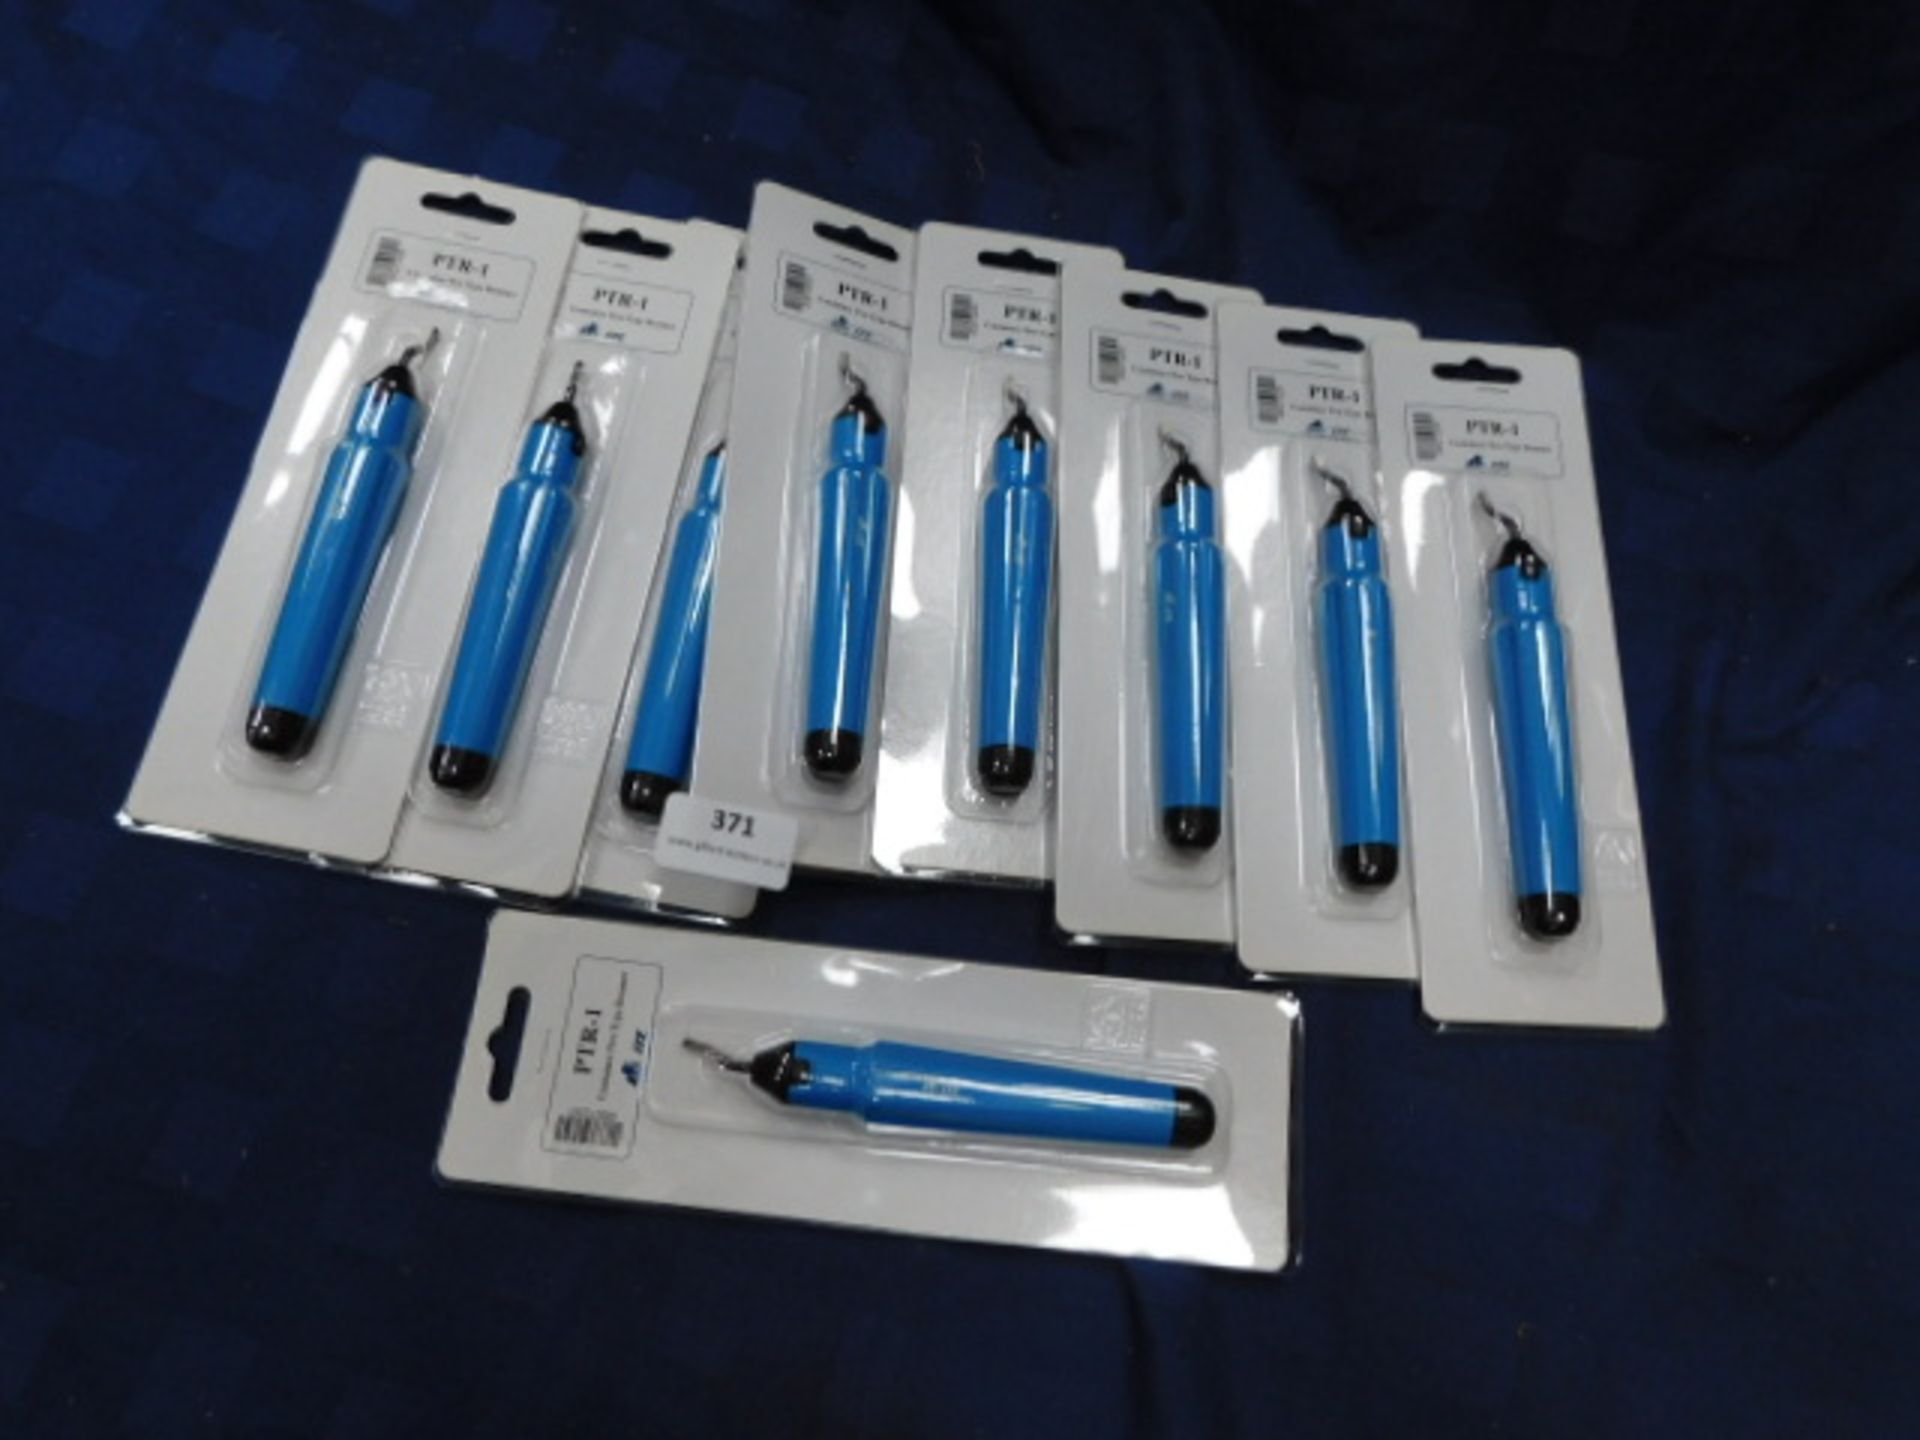 * 9x PTR-1 78932 Container Pen Type Reamer